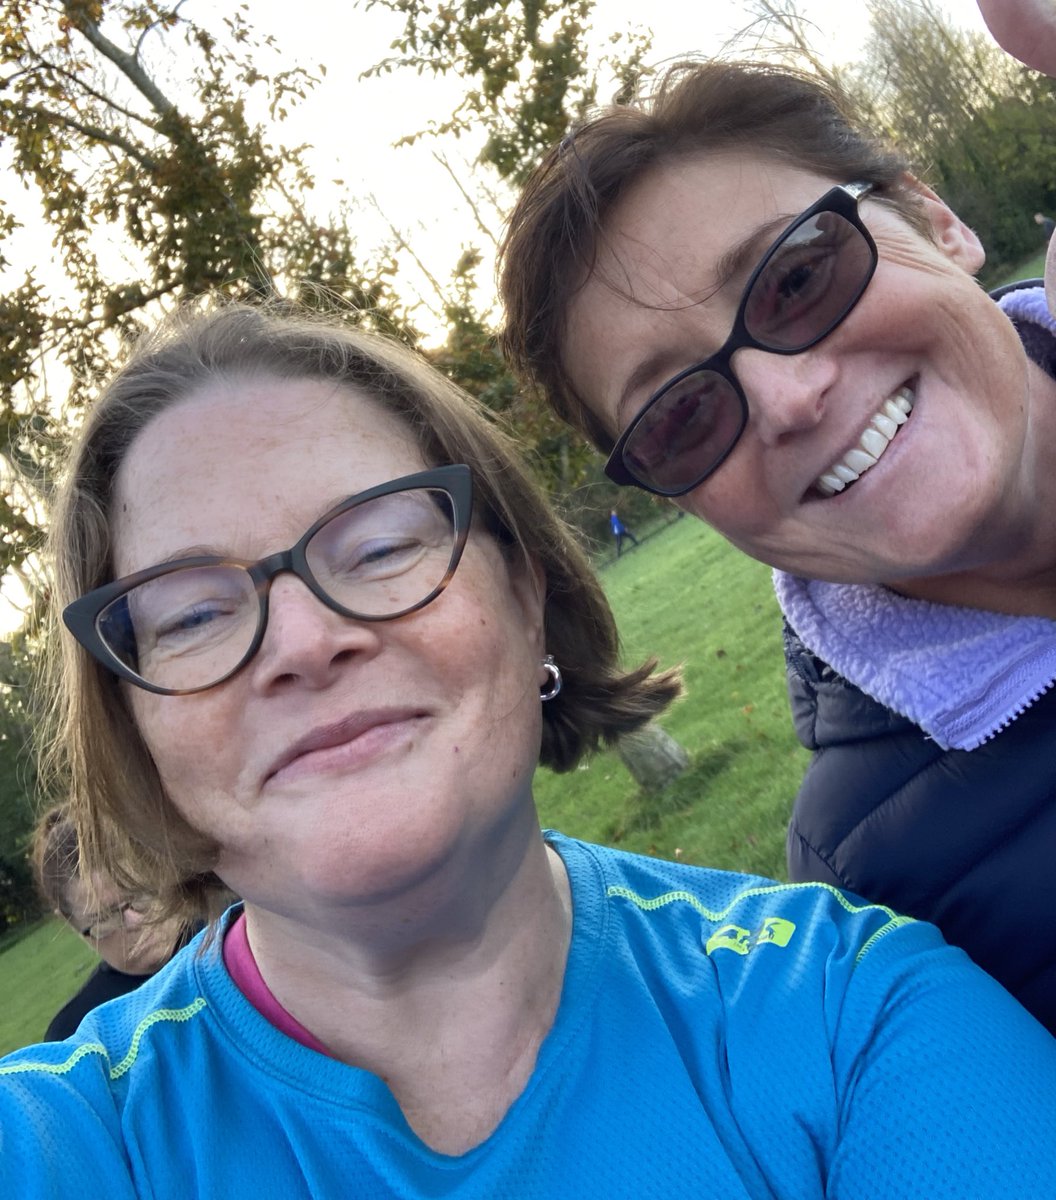 Always lovely to meet friends unexpectedly at parkrun @DeniseCrokeHPO 🥰
#CastletownExiles #parkrunfamily